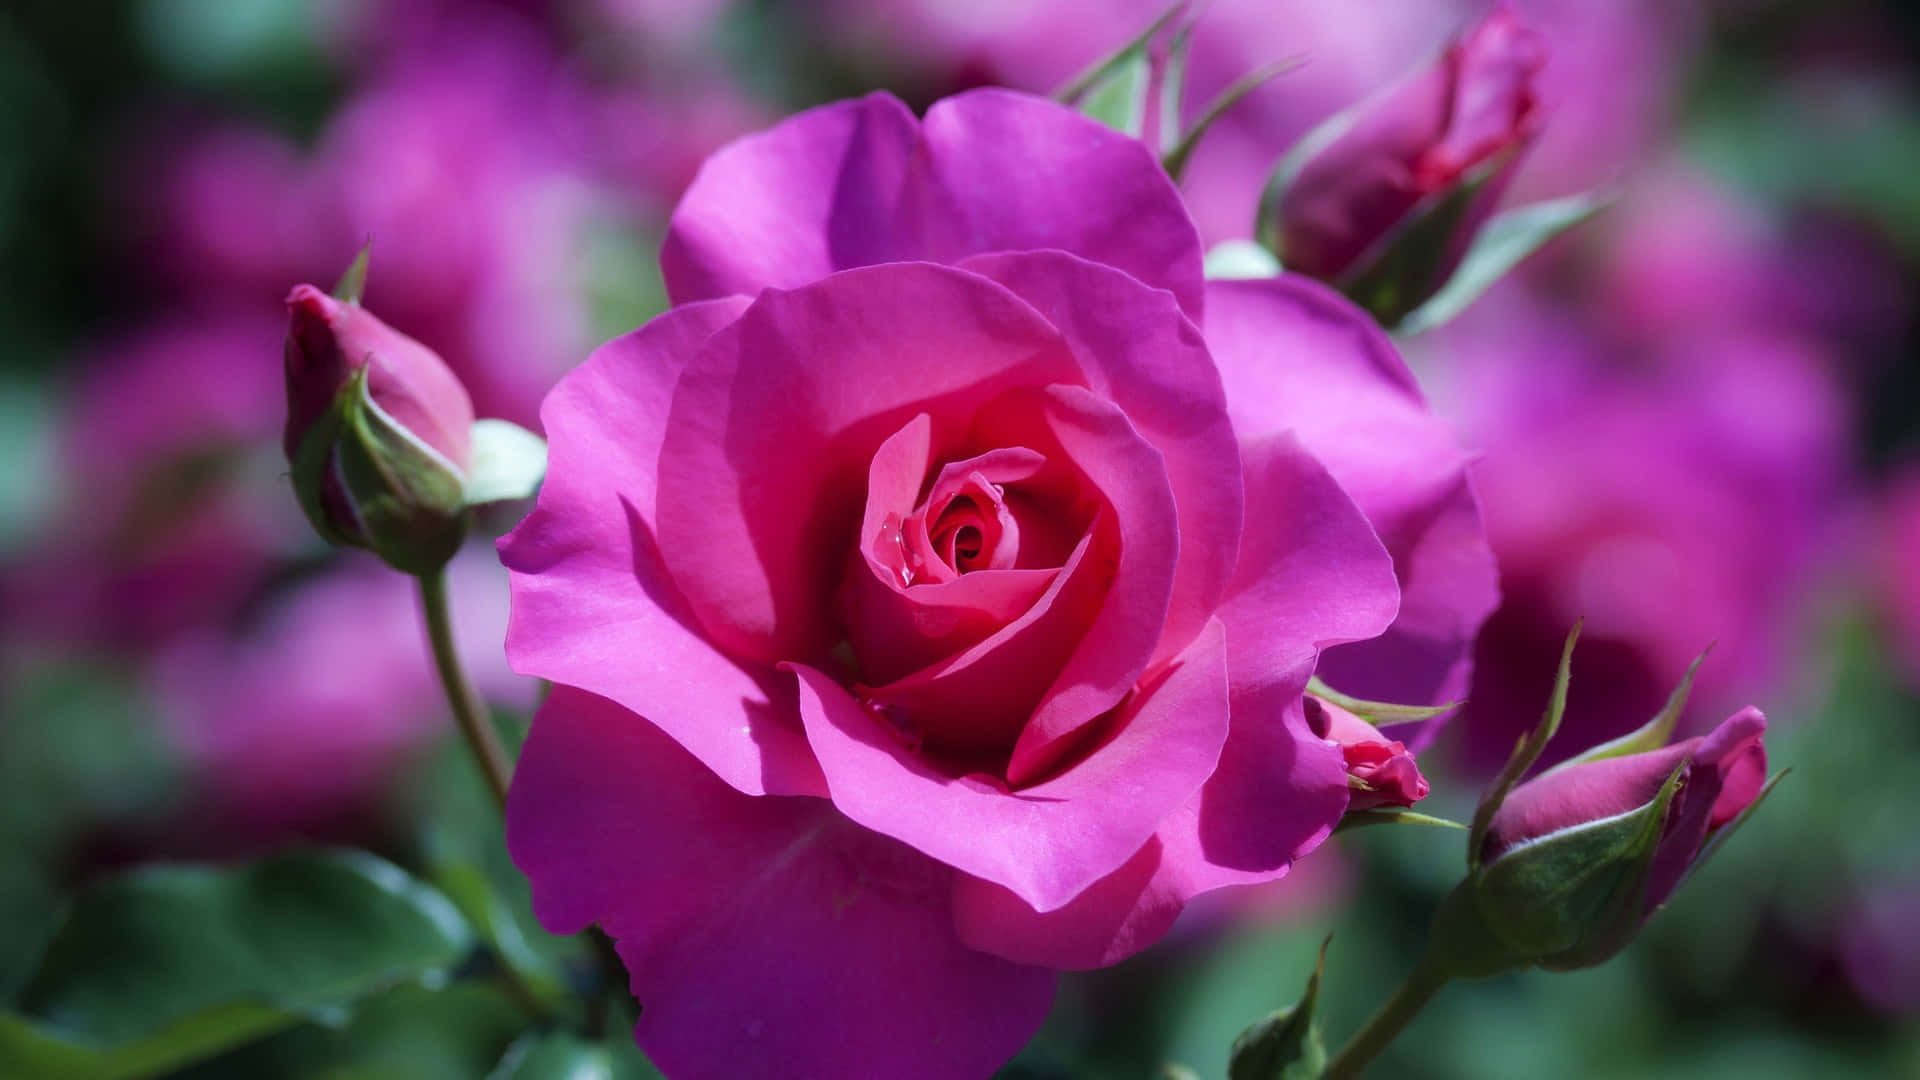 Brighten Your Day With A Beautiful Hd Rose Background